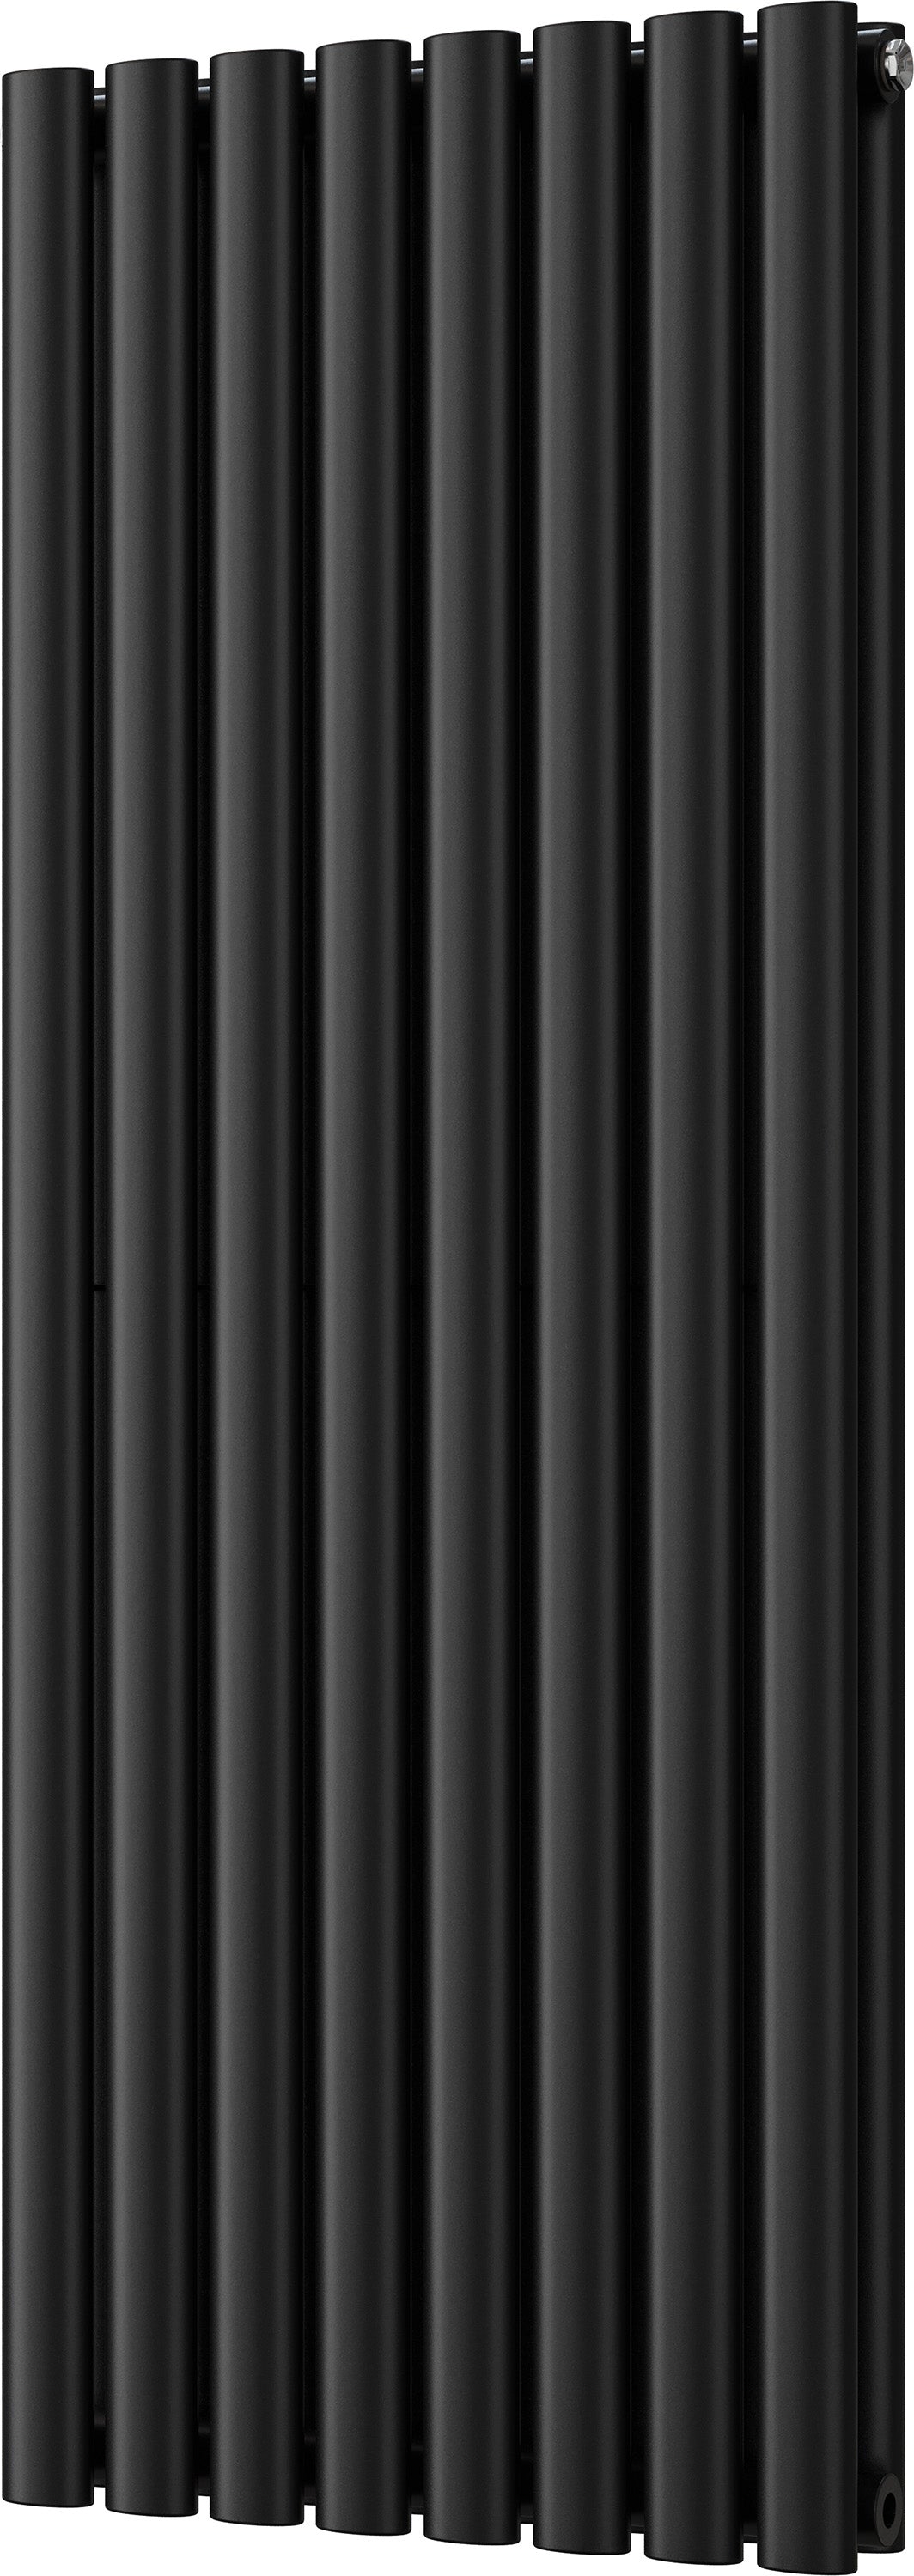 Omeara - Black Vertical Radiator H1200mm x W464mm Double Panel